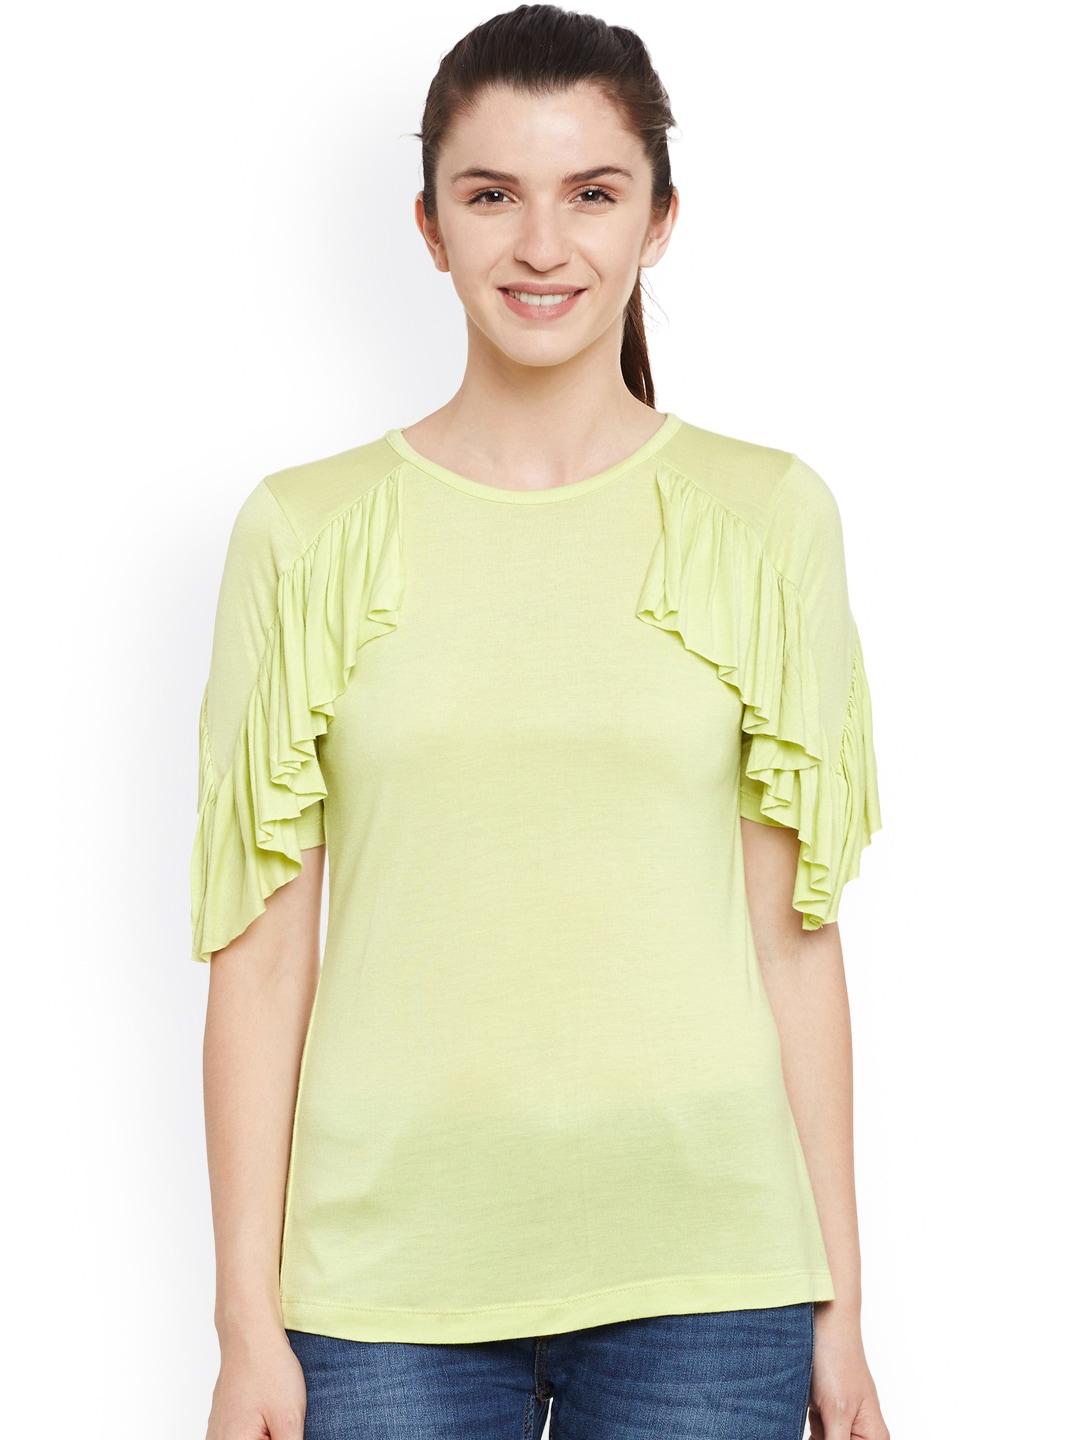 belle-fille-women-lime-green-solid-top-with-ruffled-detail